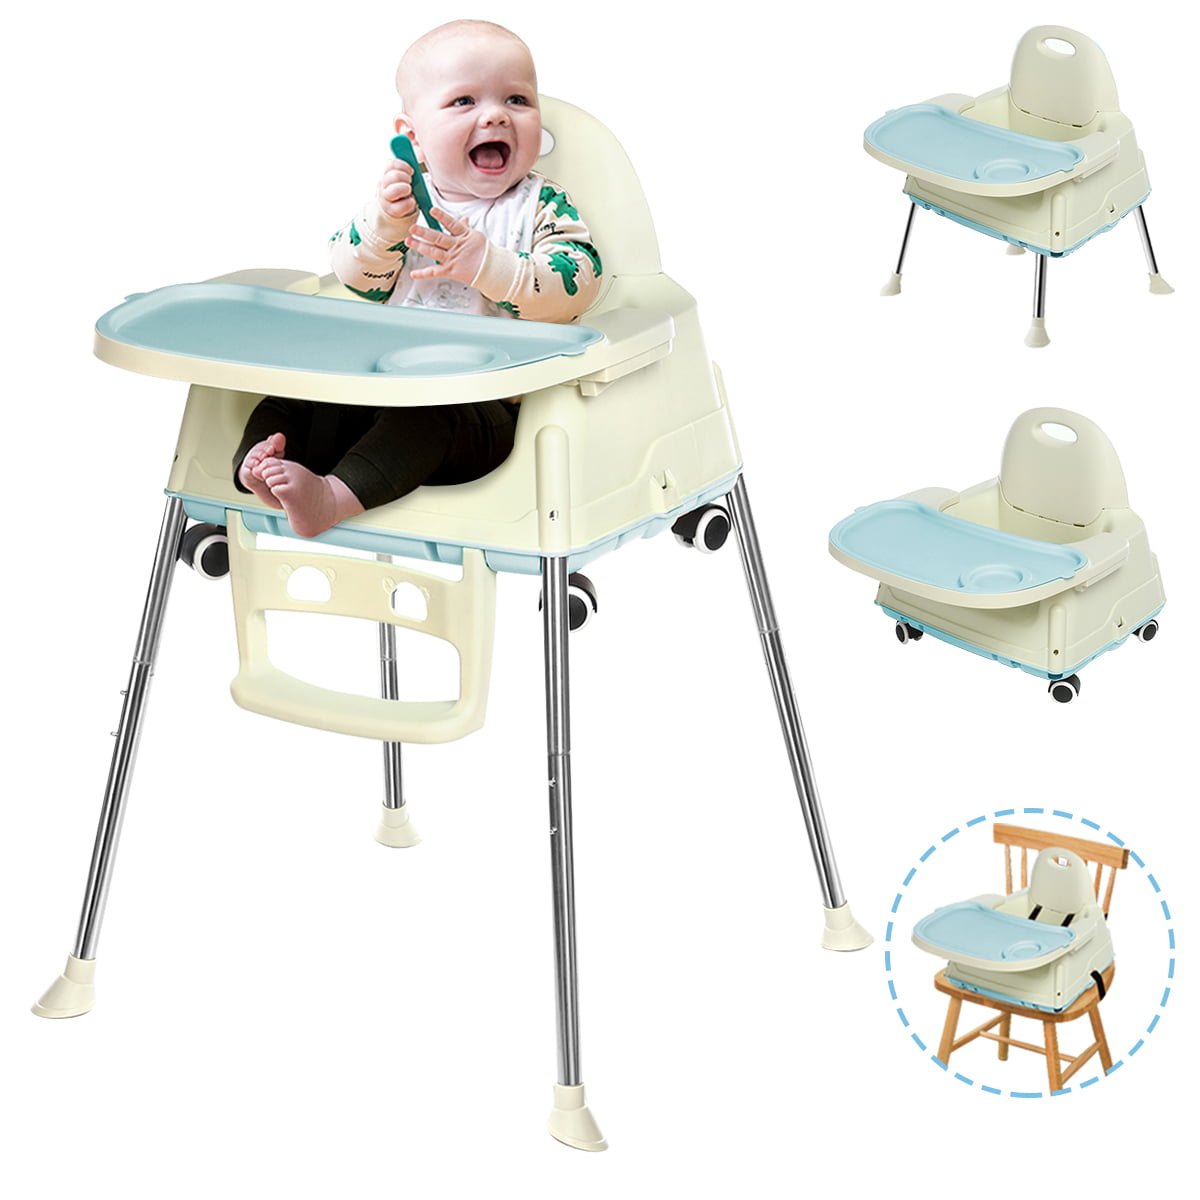 Baby High Chair,Adjustable Baby Feeding Dining Booster Table Seat Highchairs with Non-Slip Feet for Babies & Toddlers